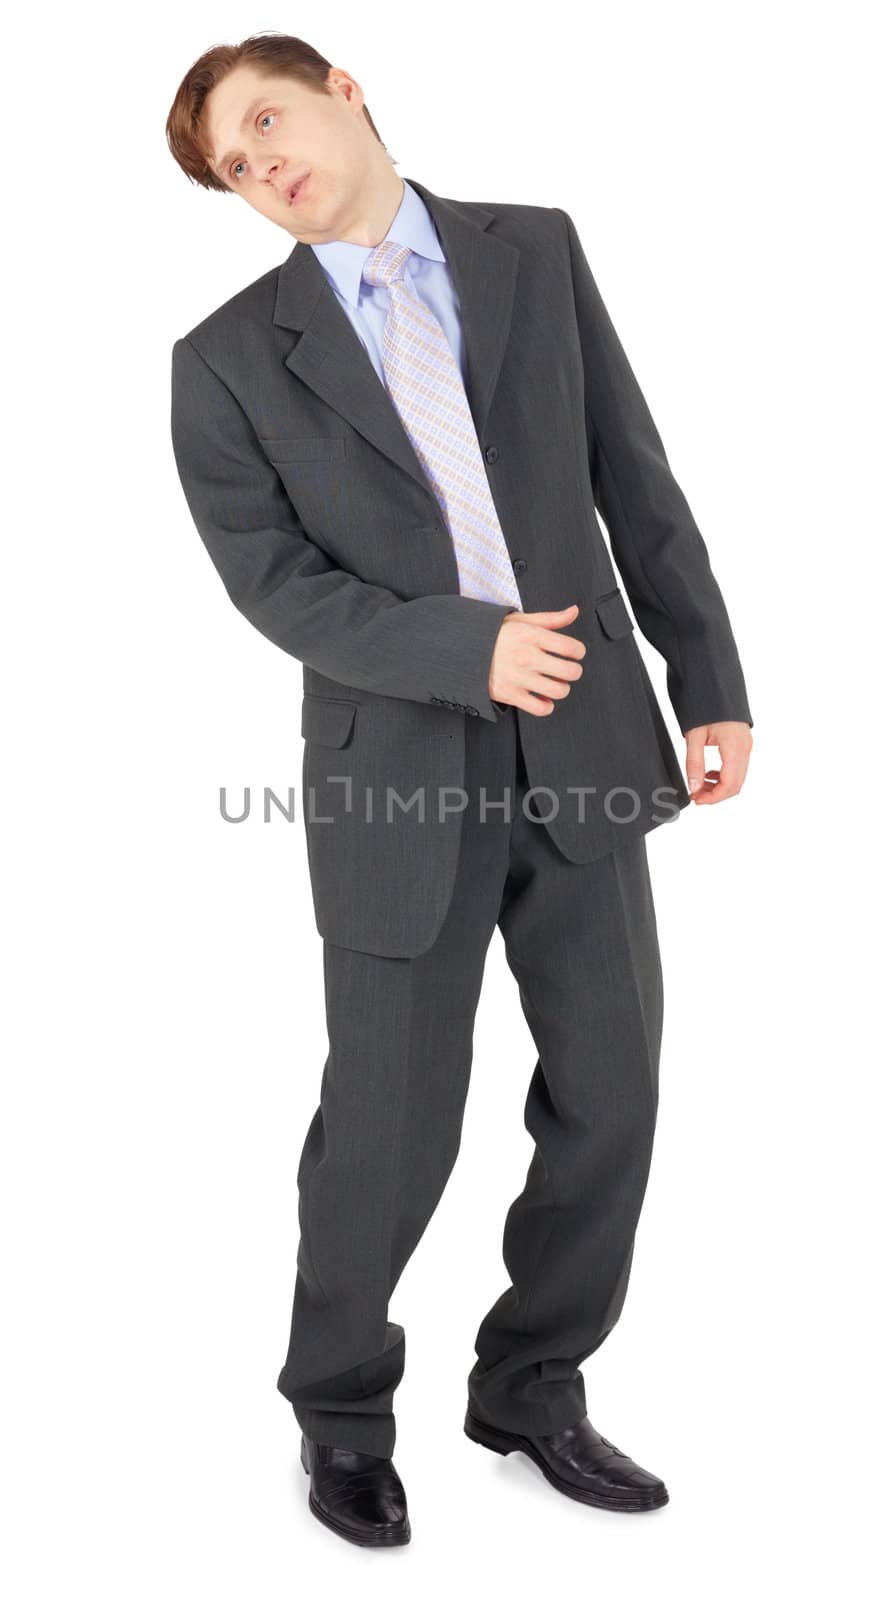 A young businessman had received a heavy blow, isolated on a white background